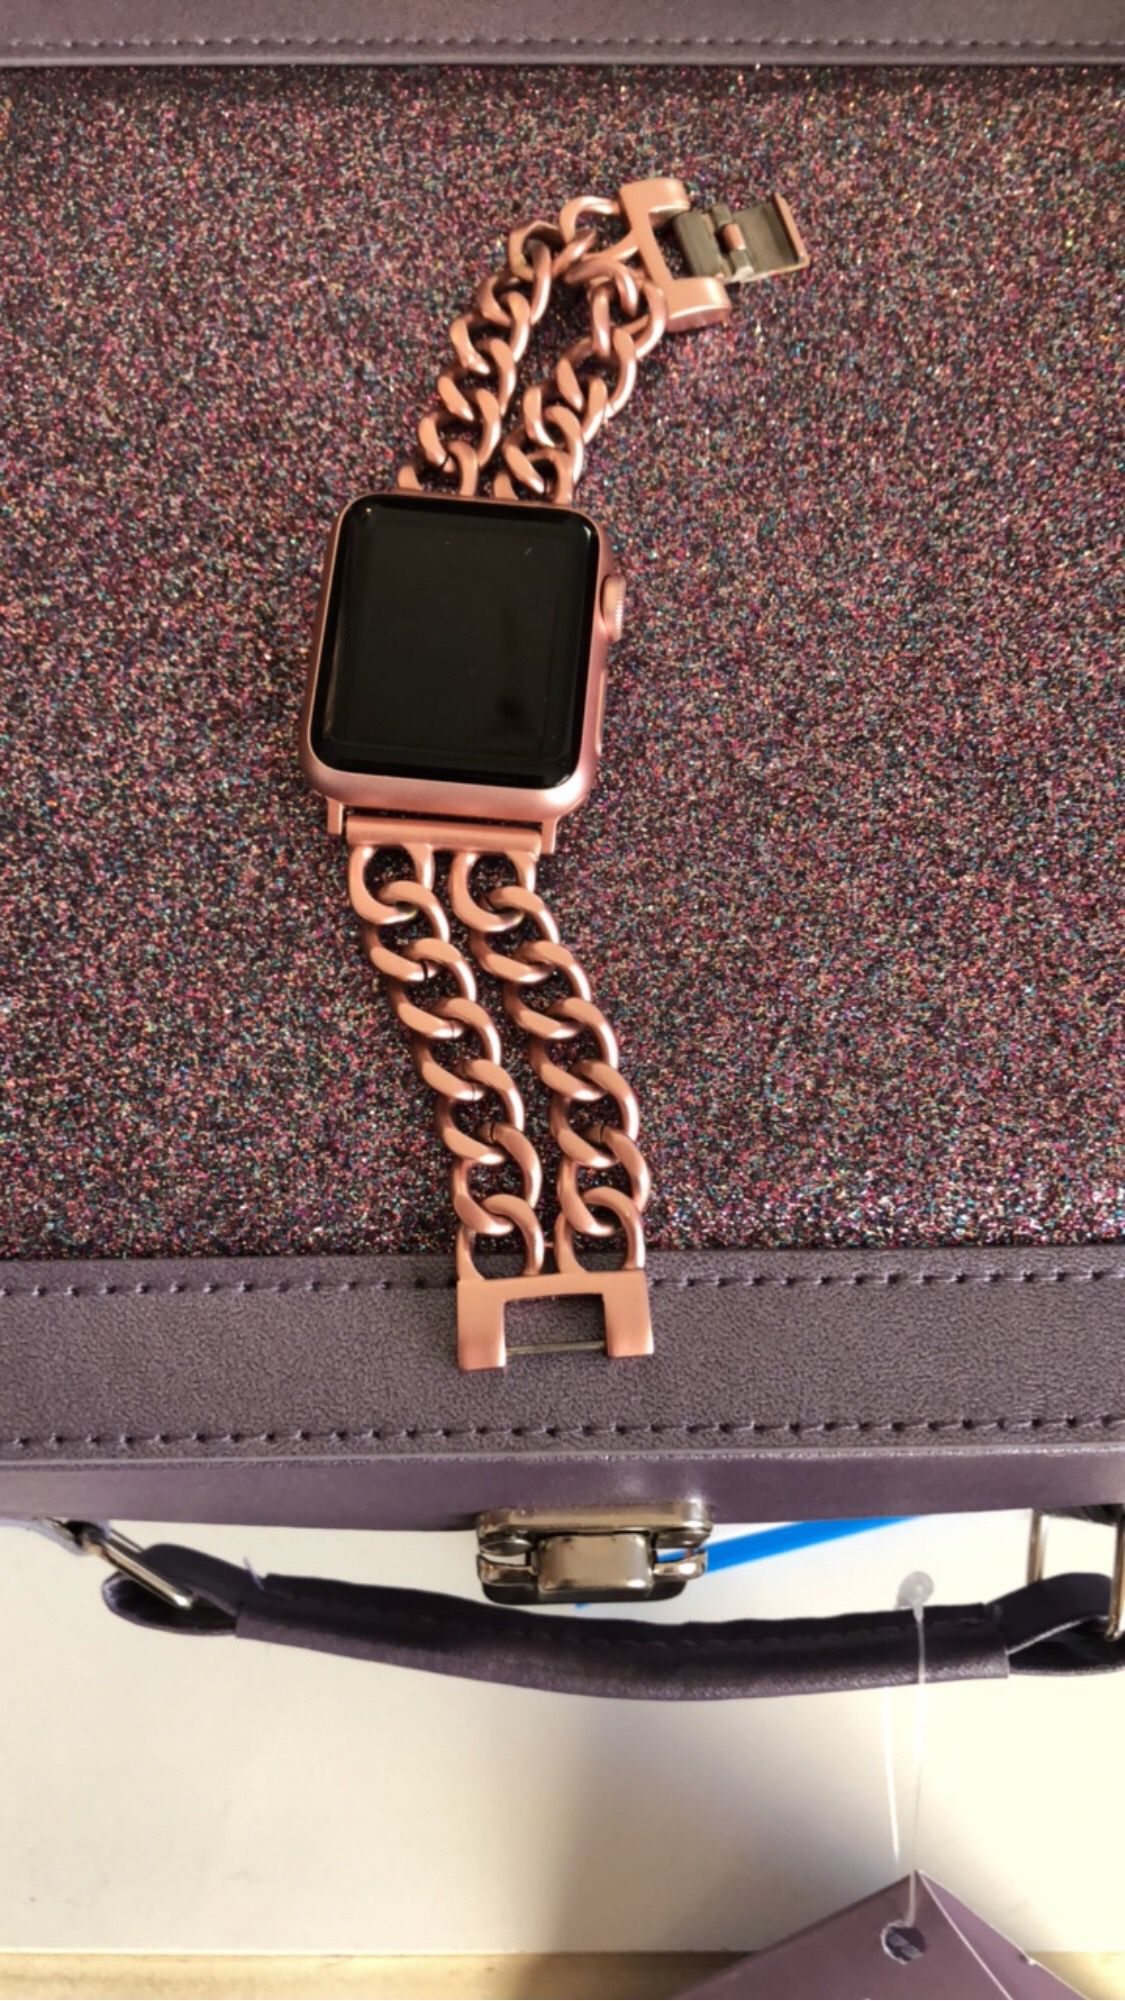 Pictures And A Apple Watch